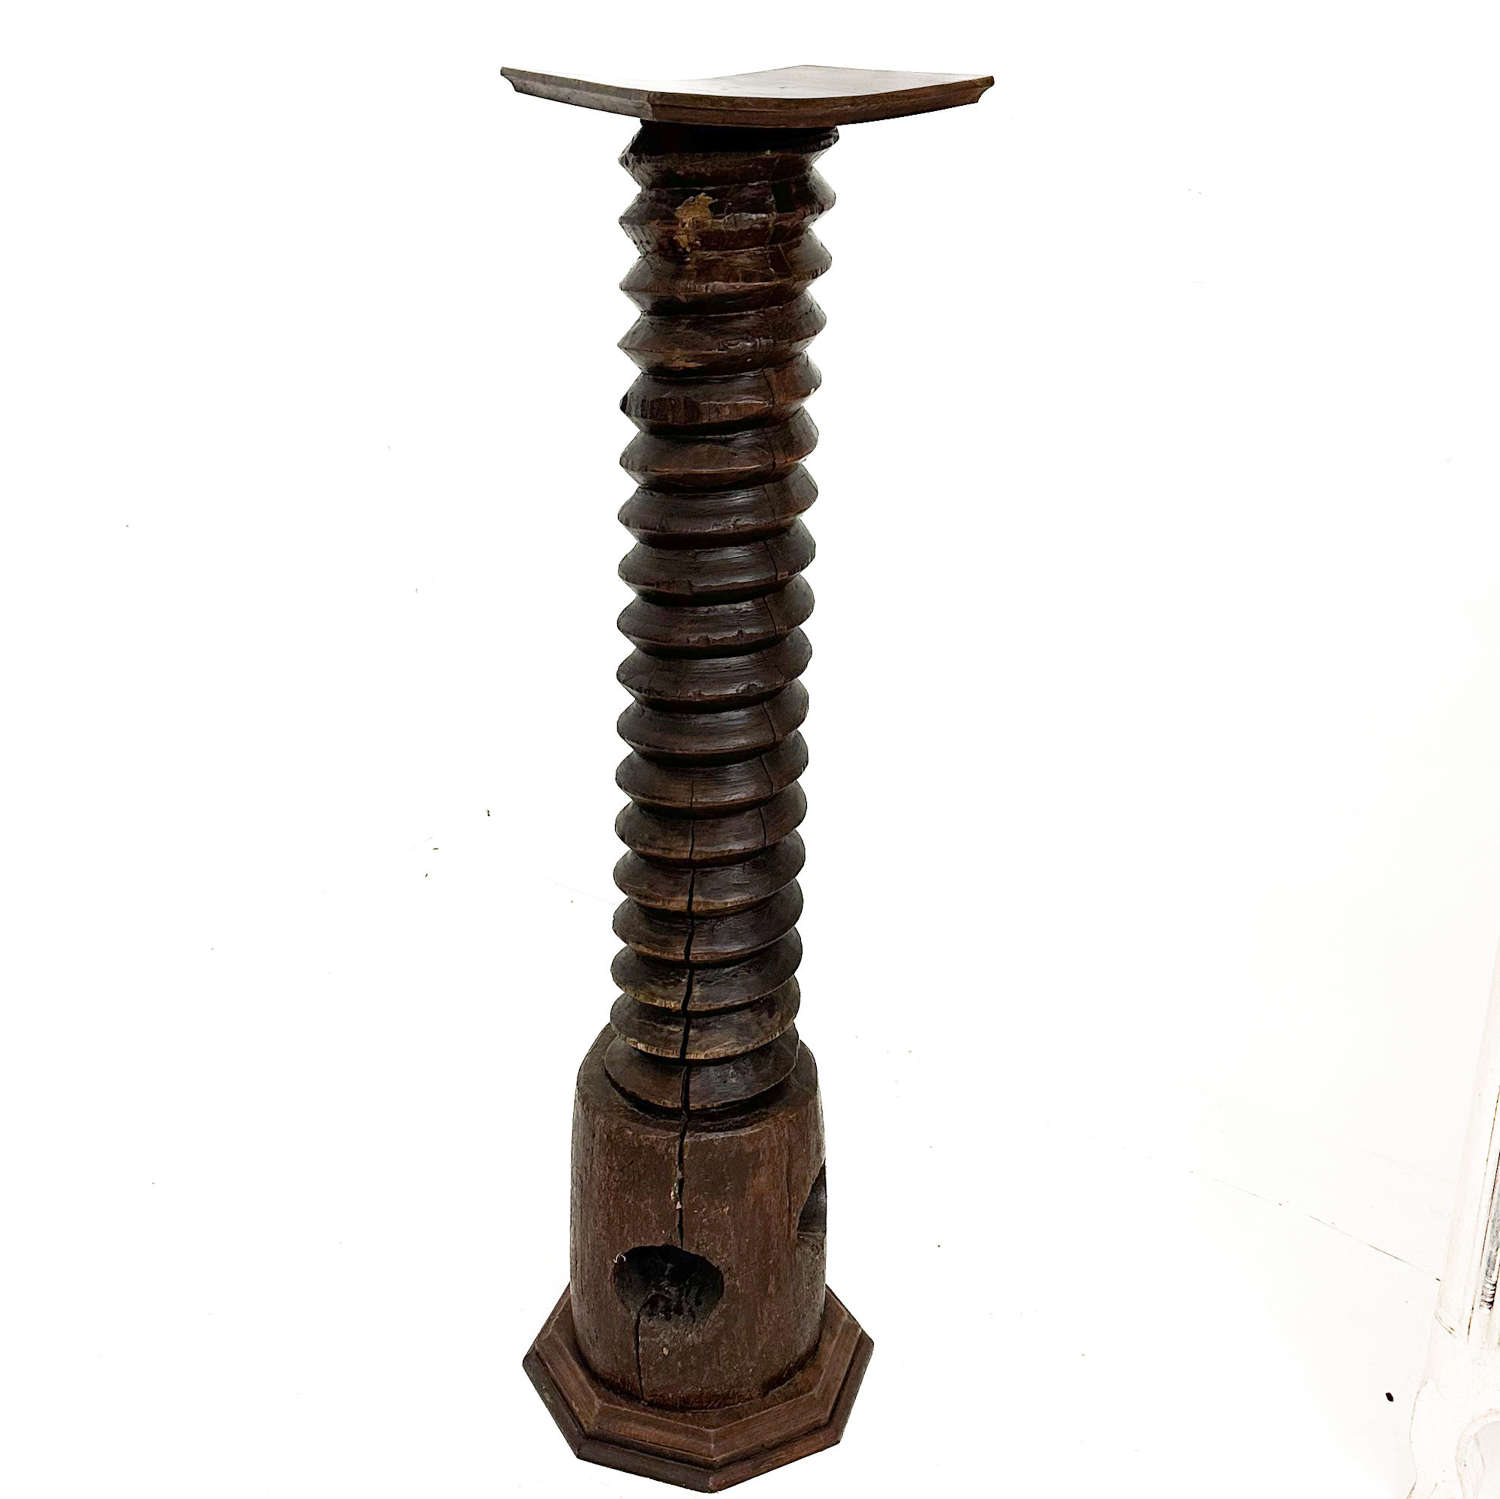 Olive/Wine Screw Press late 18th Century later converted to Jardinière